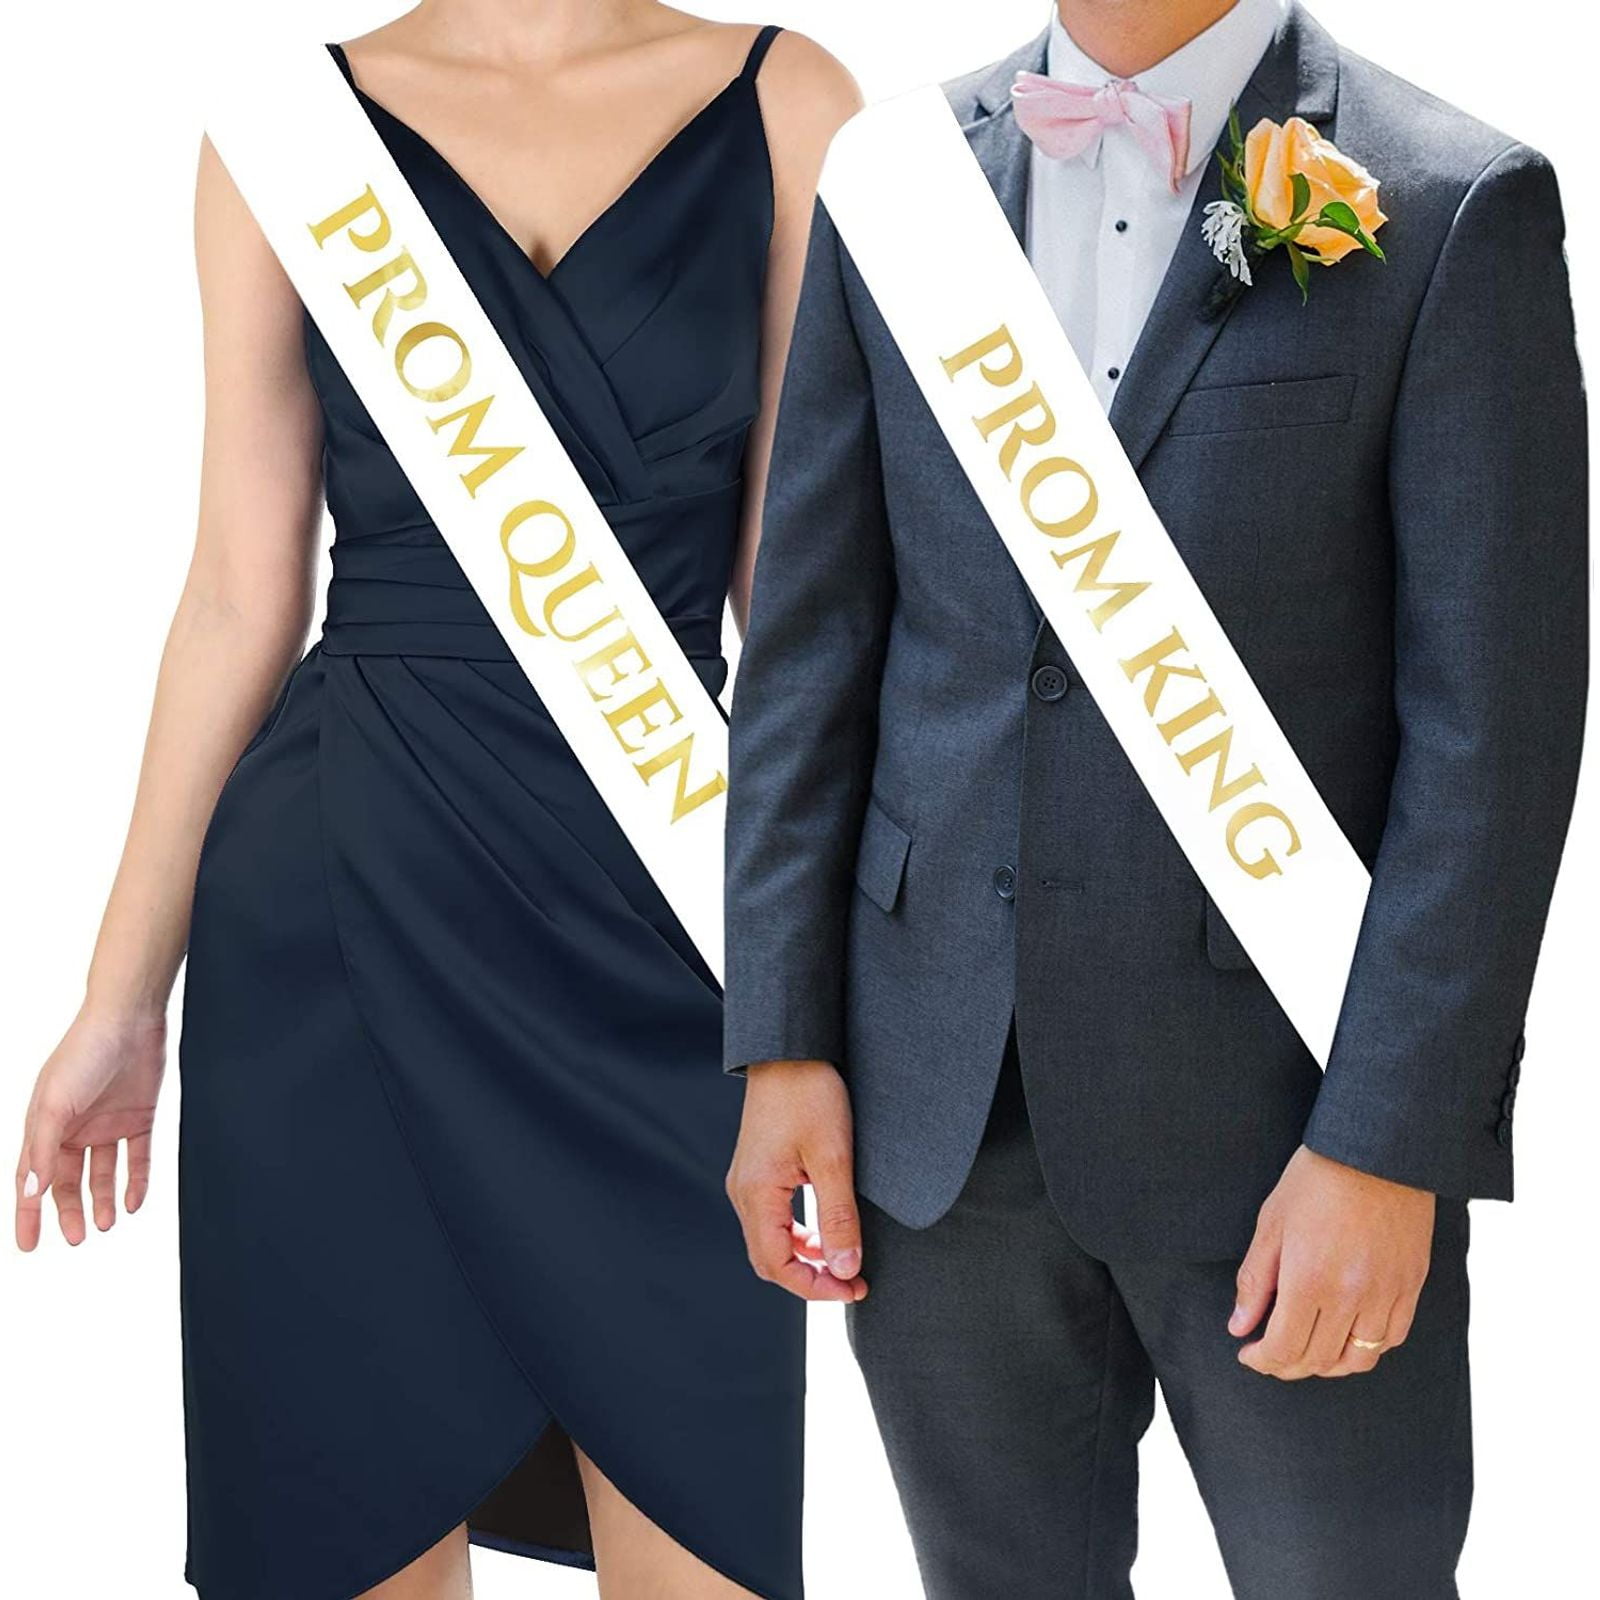 Prom Sashes Silver Prom Queen and Prom King Sash Set graduation homecoming 